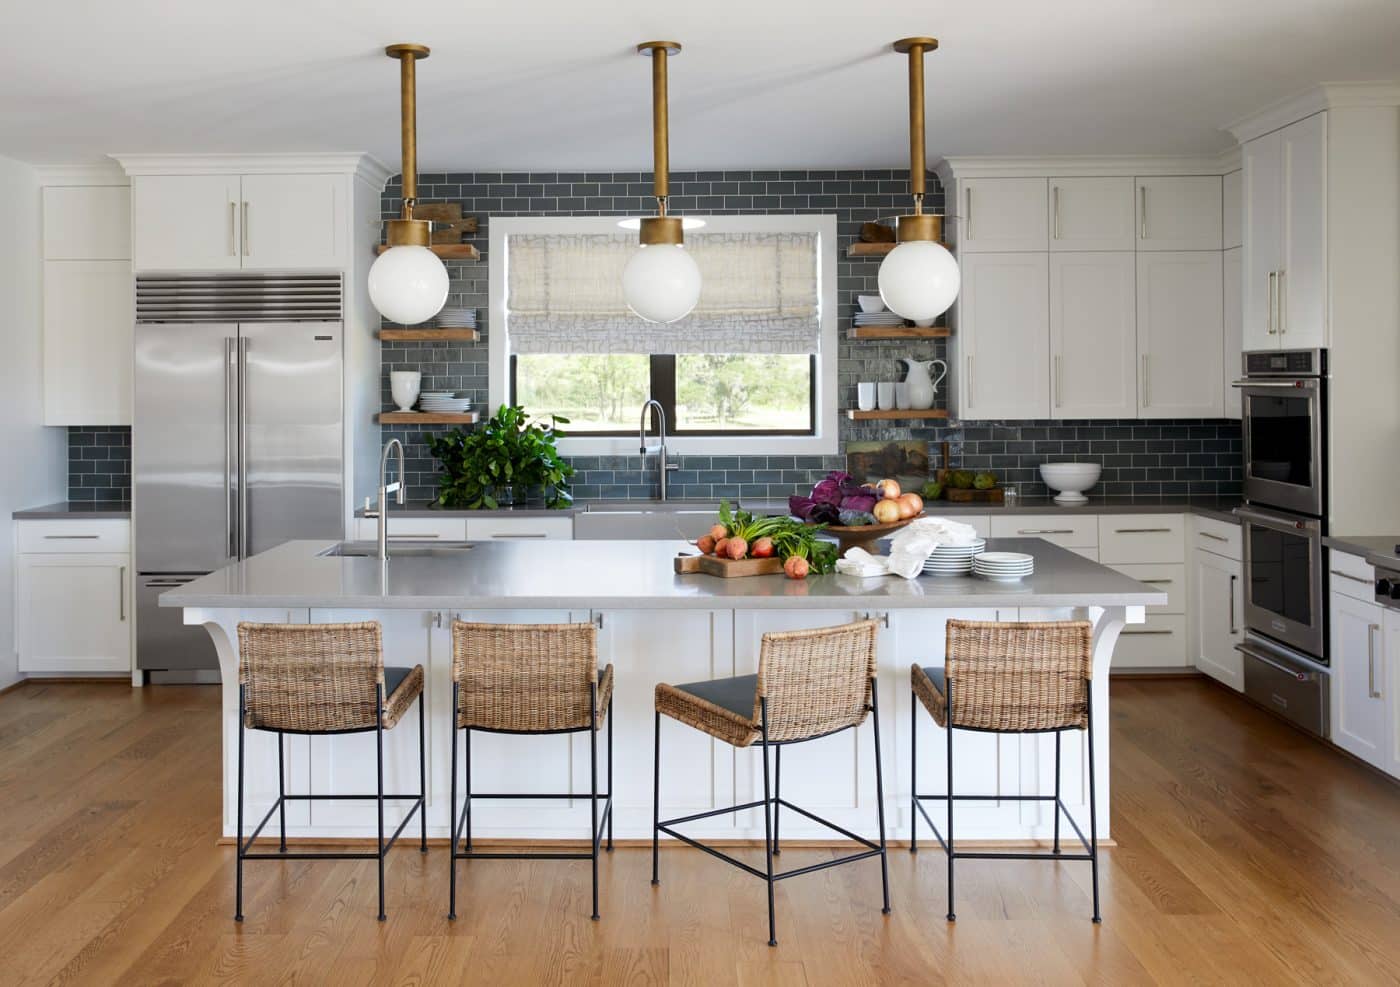 Palechek barstools pull up to an ample kitchen island with Urban Electric Pipe Hang pendant lights above. The custom-colored tiles are by Waterworks.